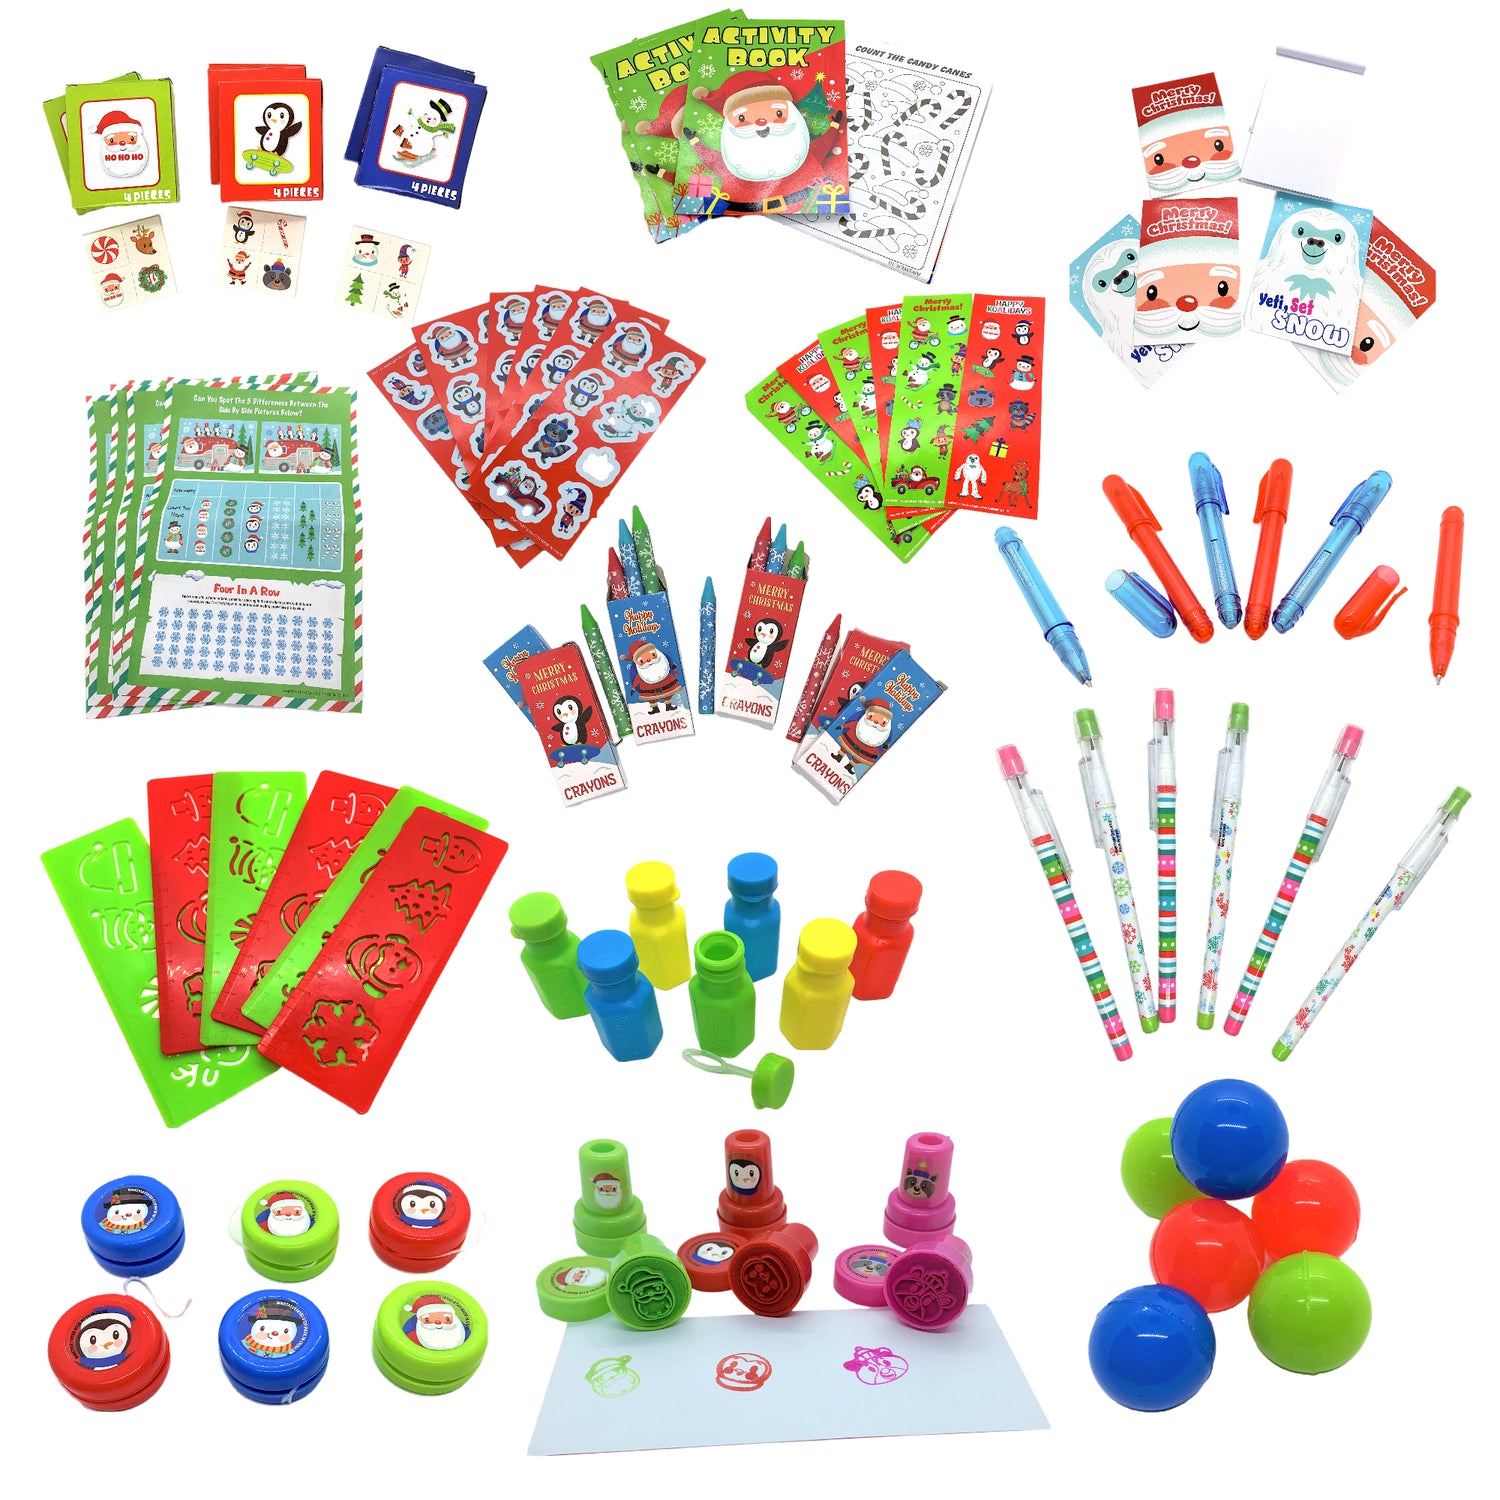 Christmas Stocking Kit favorite Toys Counted